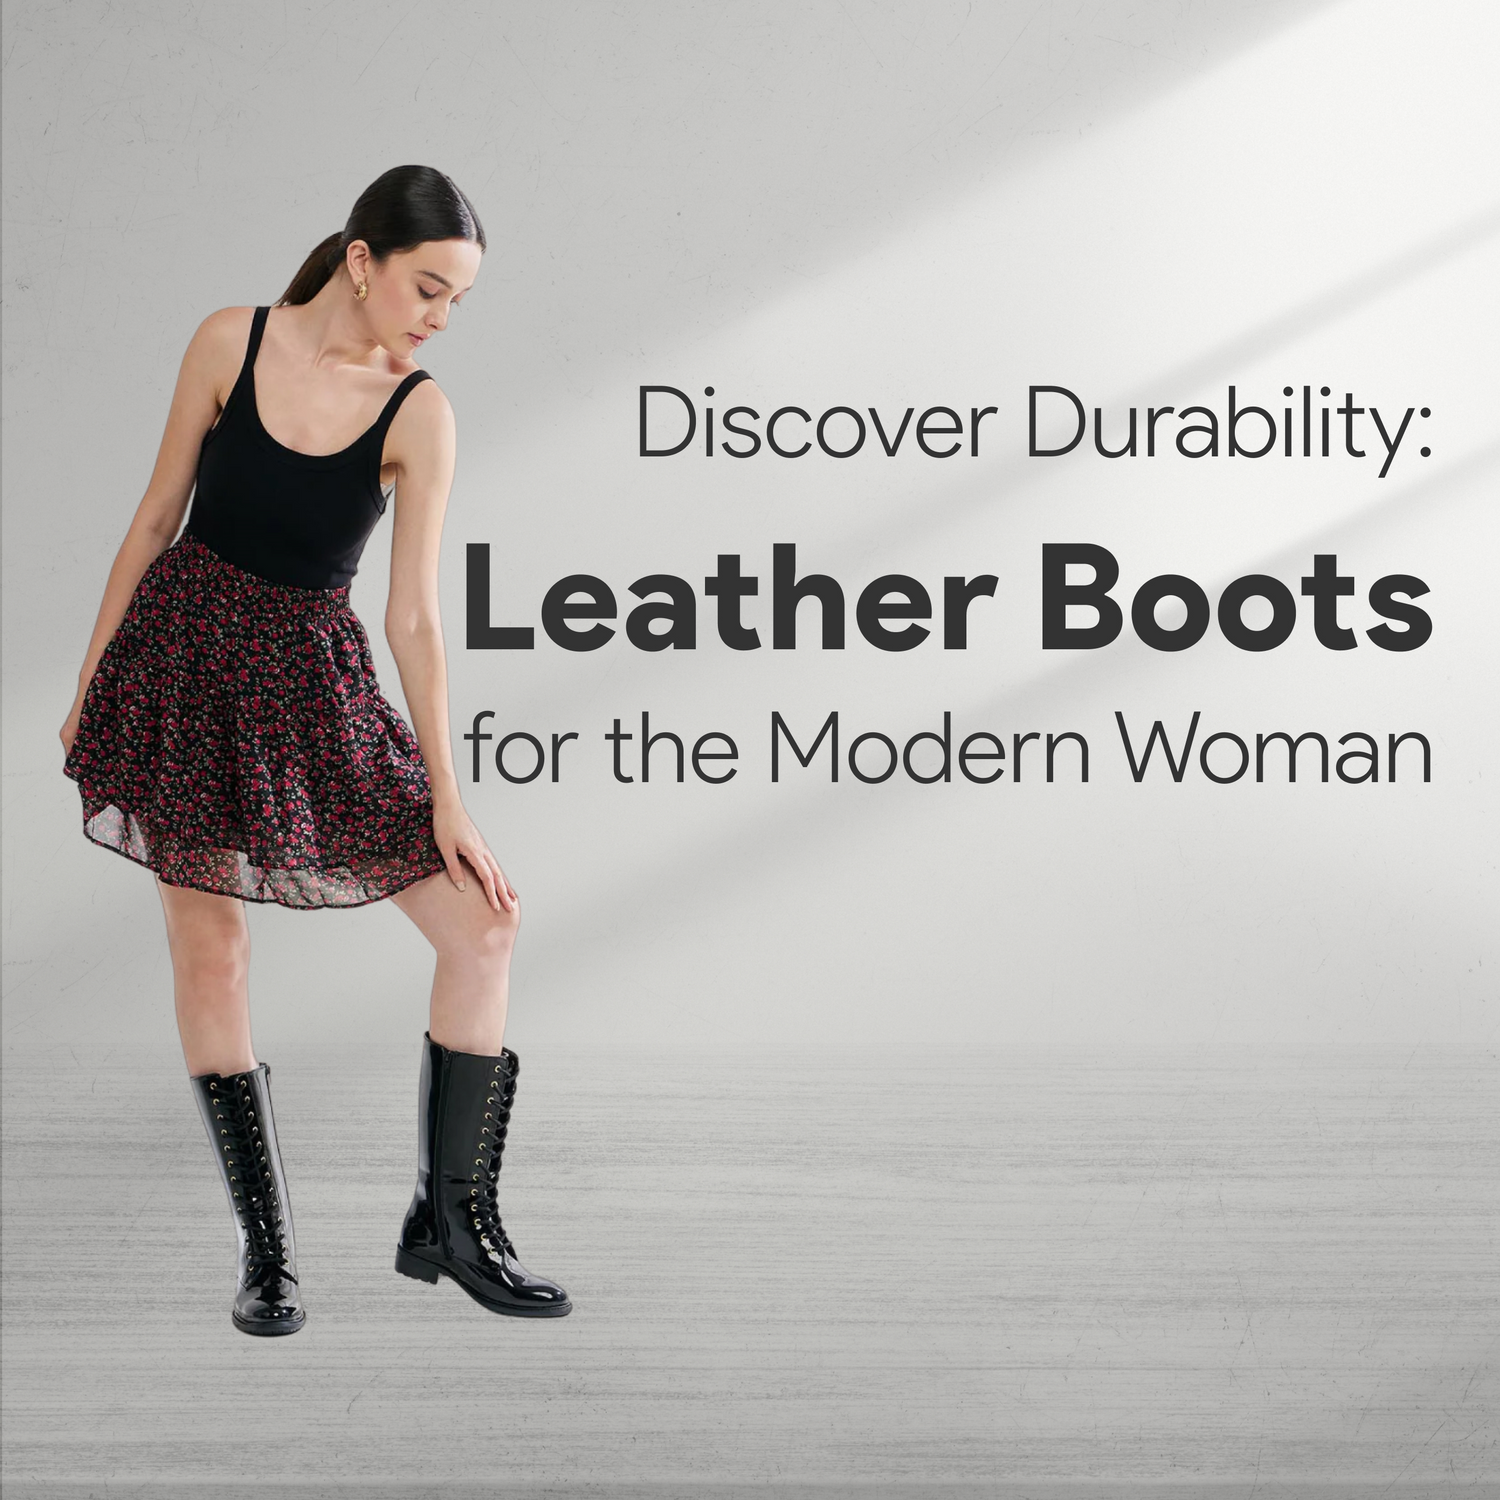 Discover Durability: Leather Boots for the Modern Woman